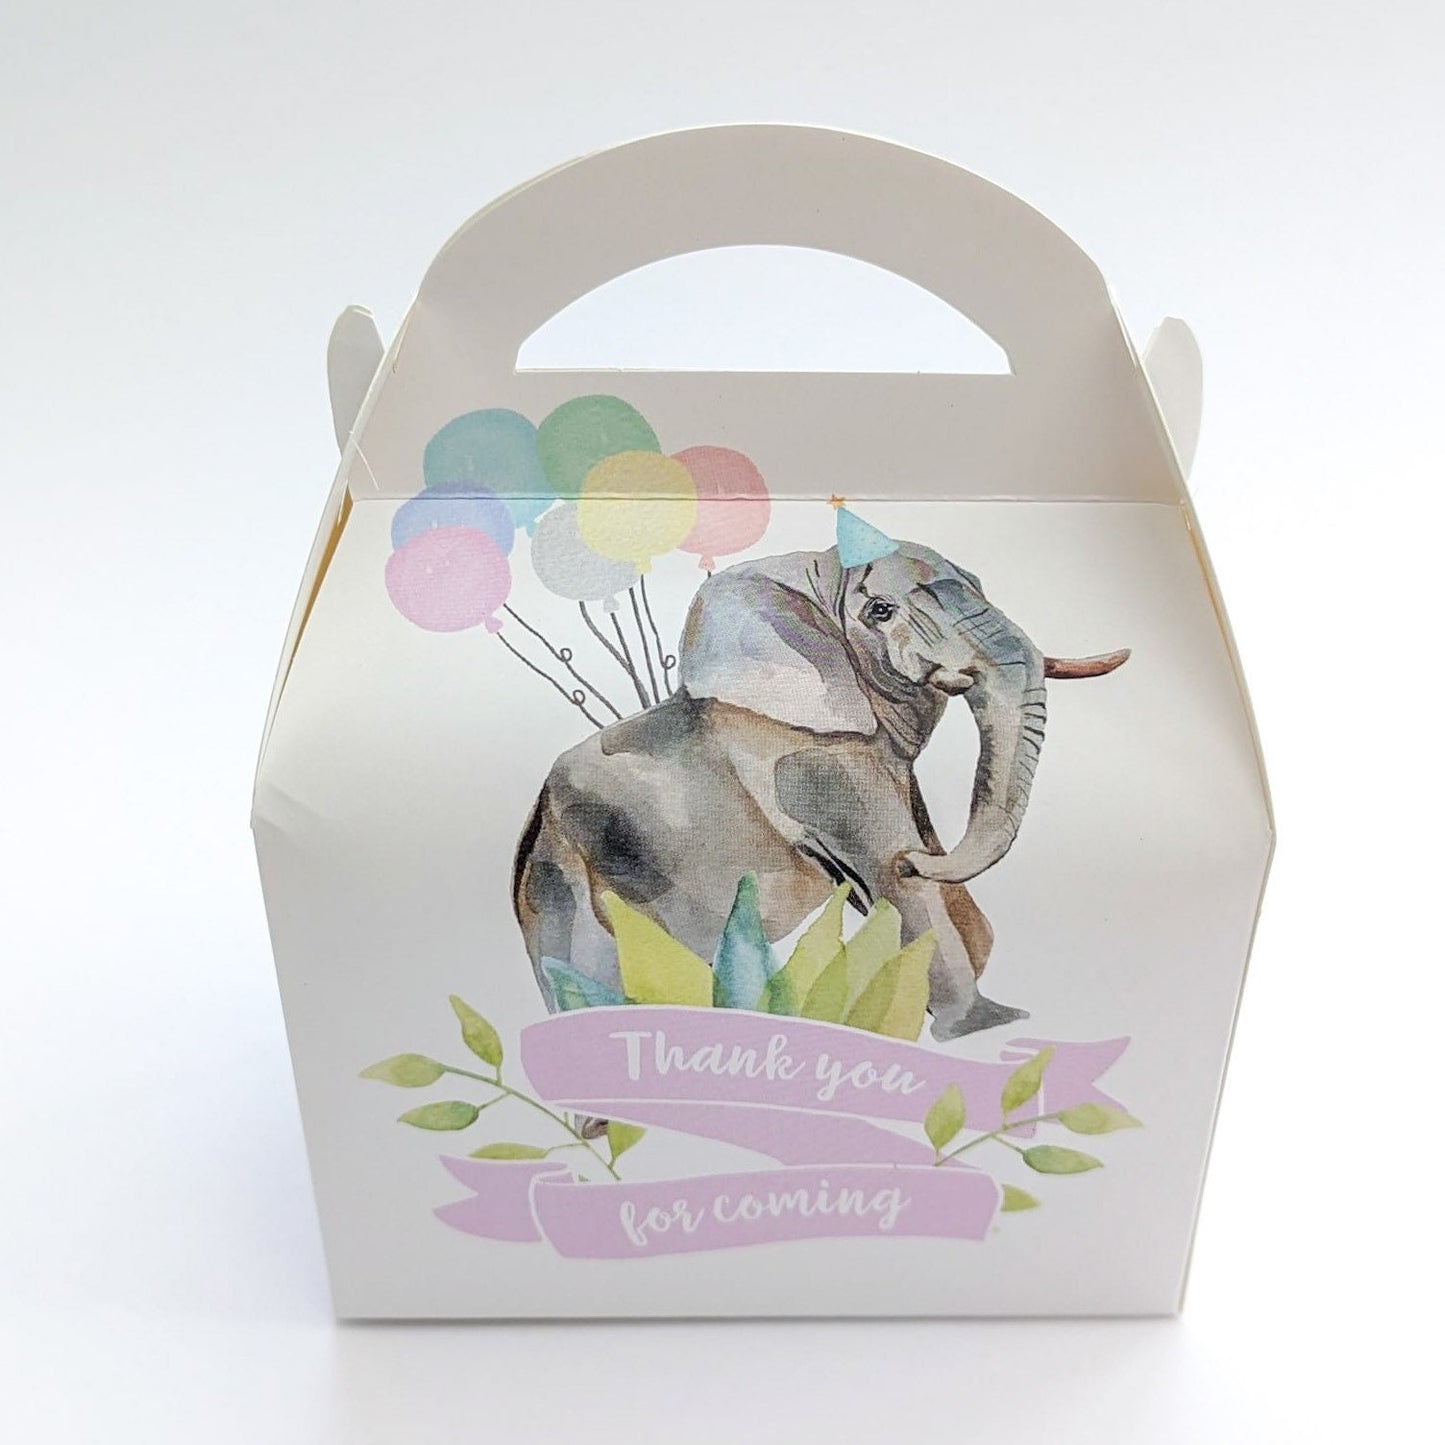 Watercolour jungle party animals Personalised Children’s Party Box Gift Bag Favour